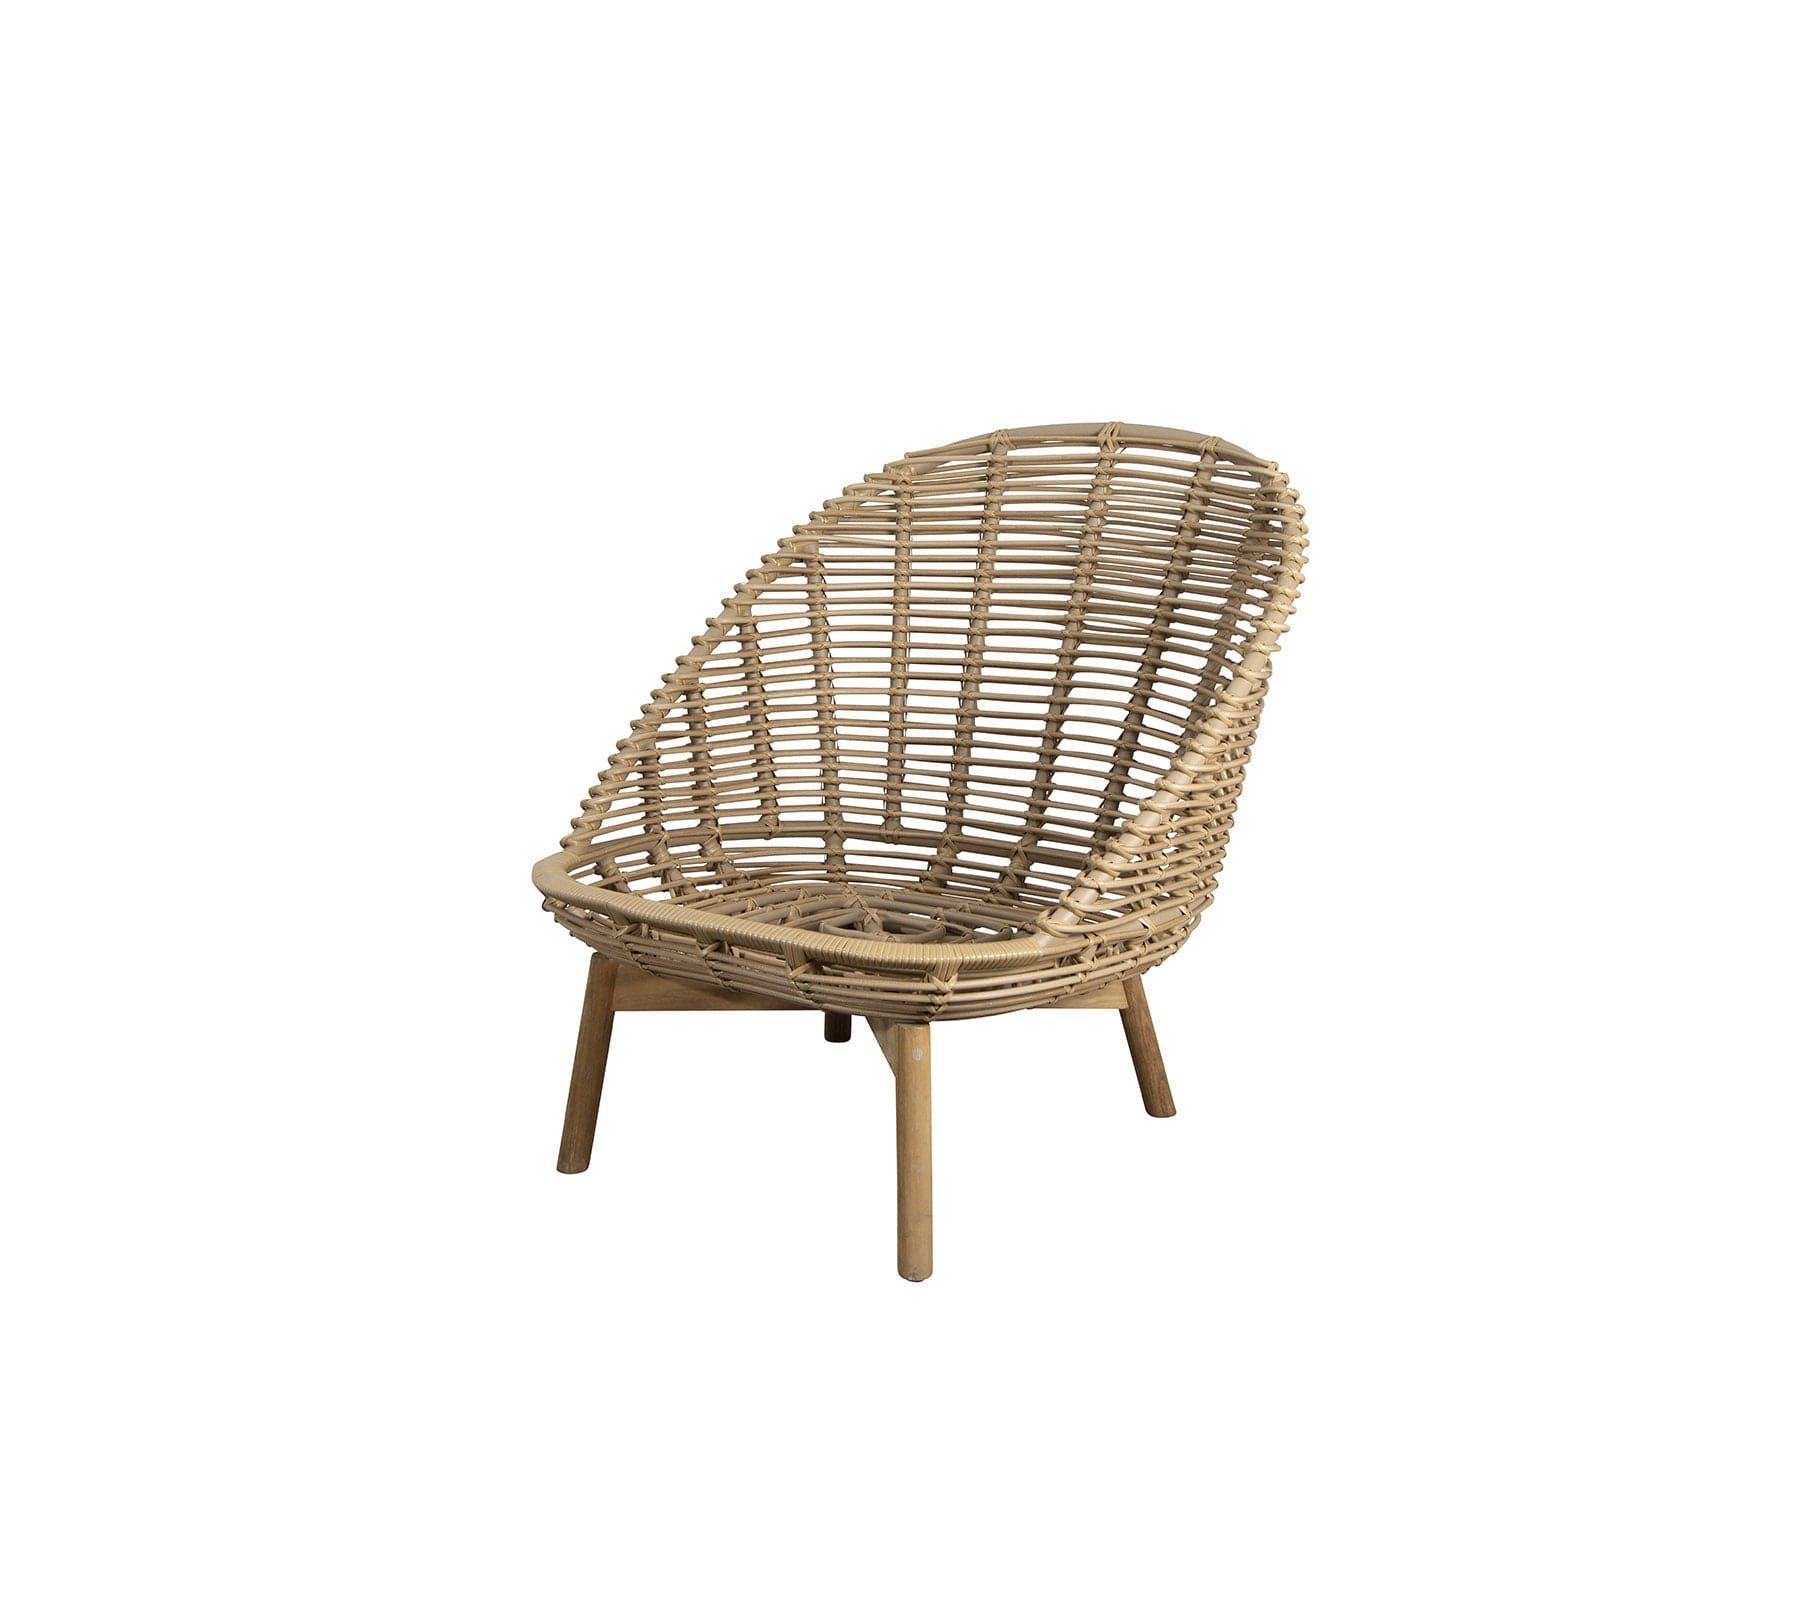 Boxhill's Hive Outdoor Lounge Chair no cushion in white background